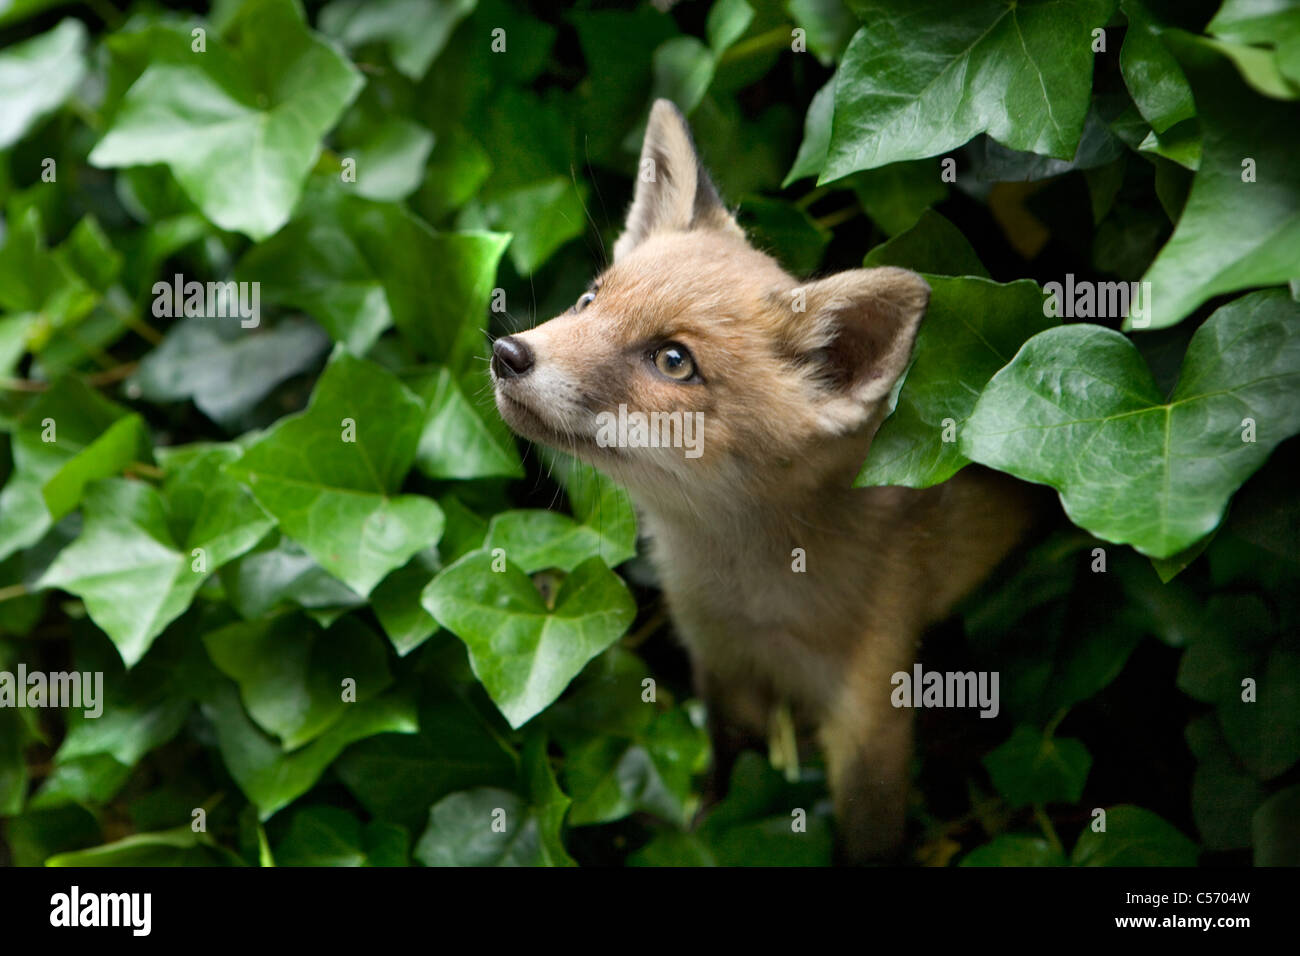 The Netherlands, 's-Graveland. Rural Estate called Gooilust. Young fox who has lost his mother. Stock Photo